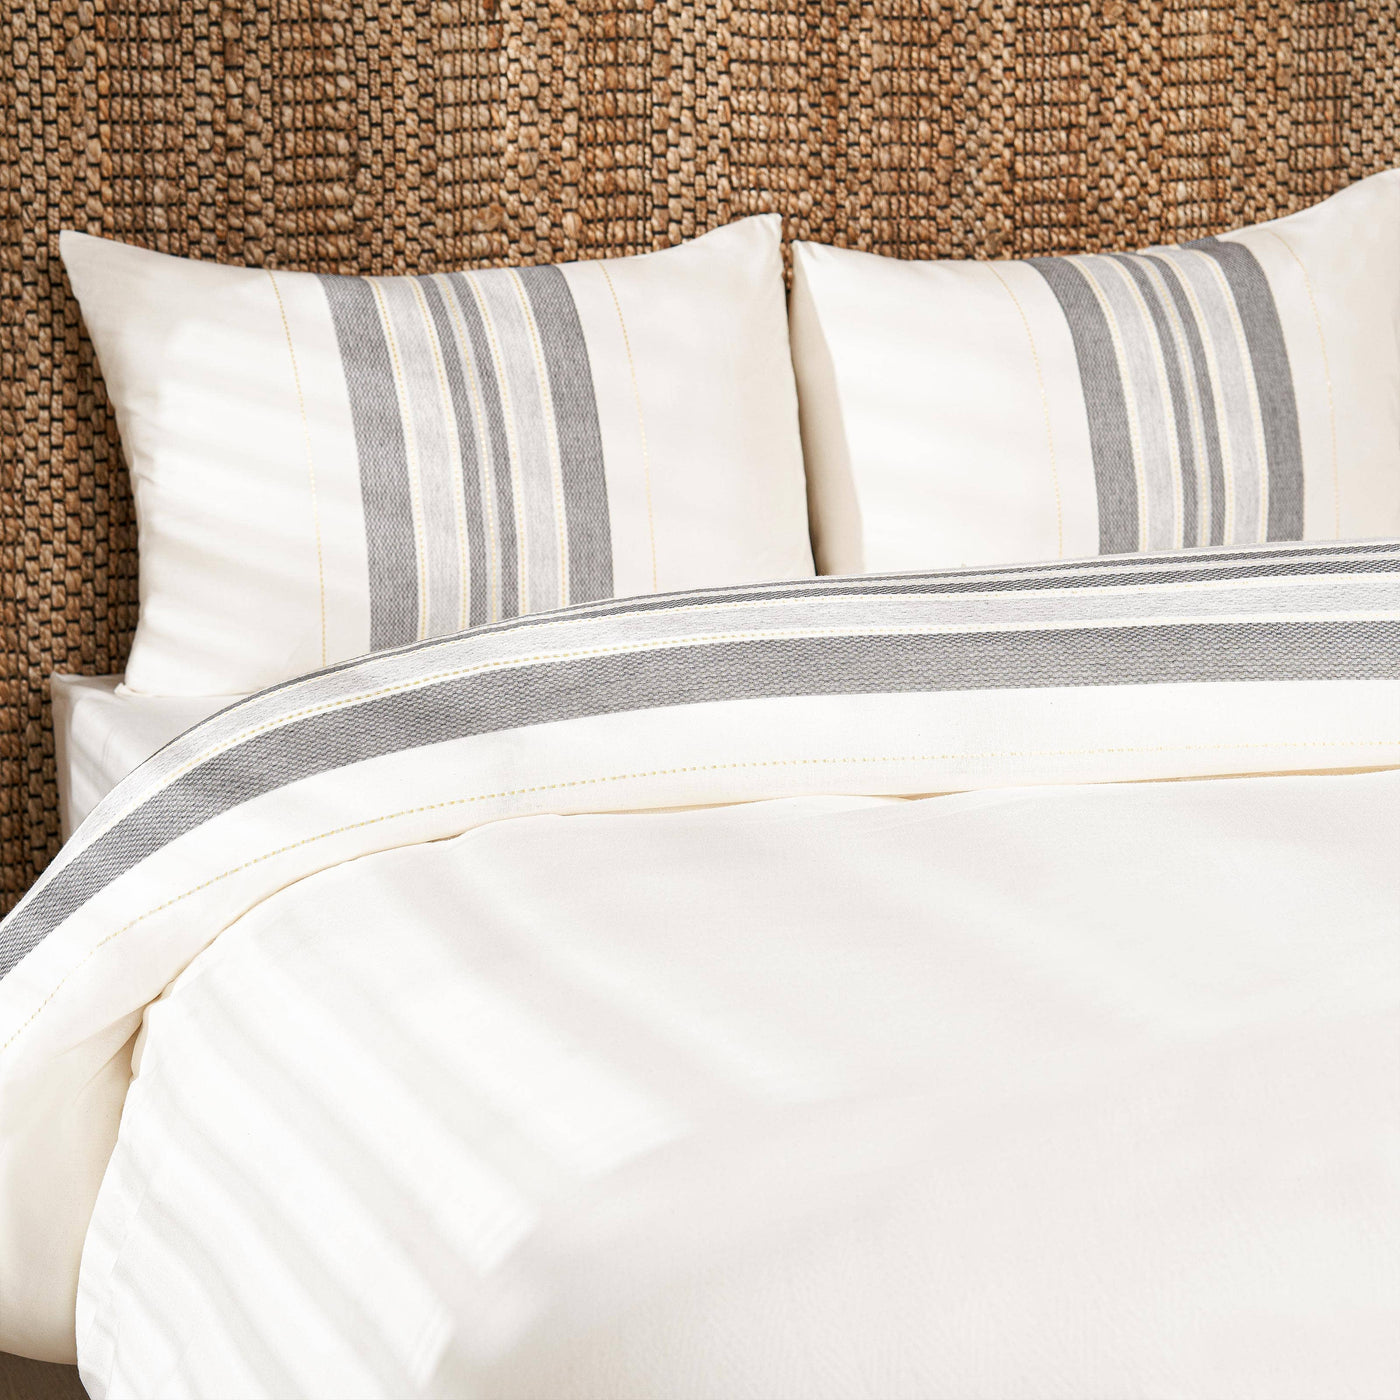 Cara Striped Turkish Cotton Duvet Cover Set + Fitted Sheet, Off-White - Anthracite Grey, King Size Bedding Sets sazy.com